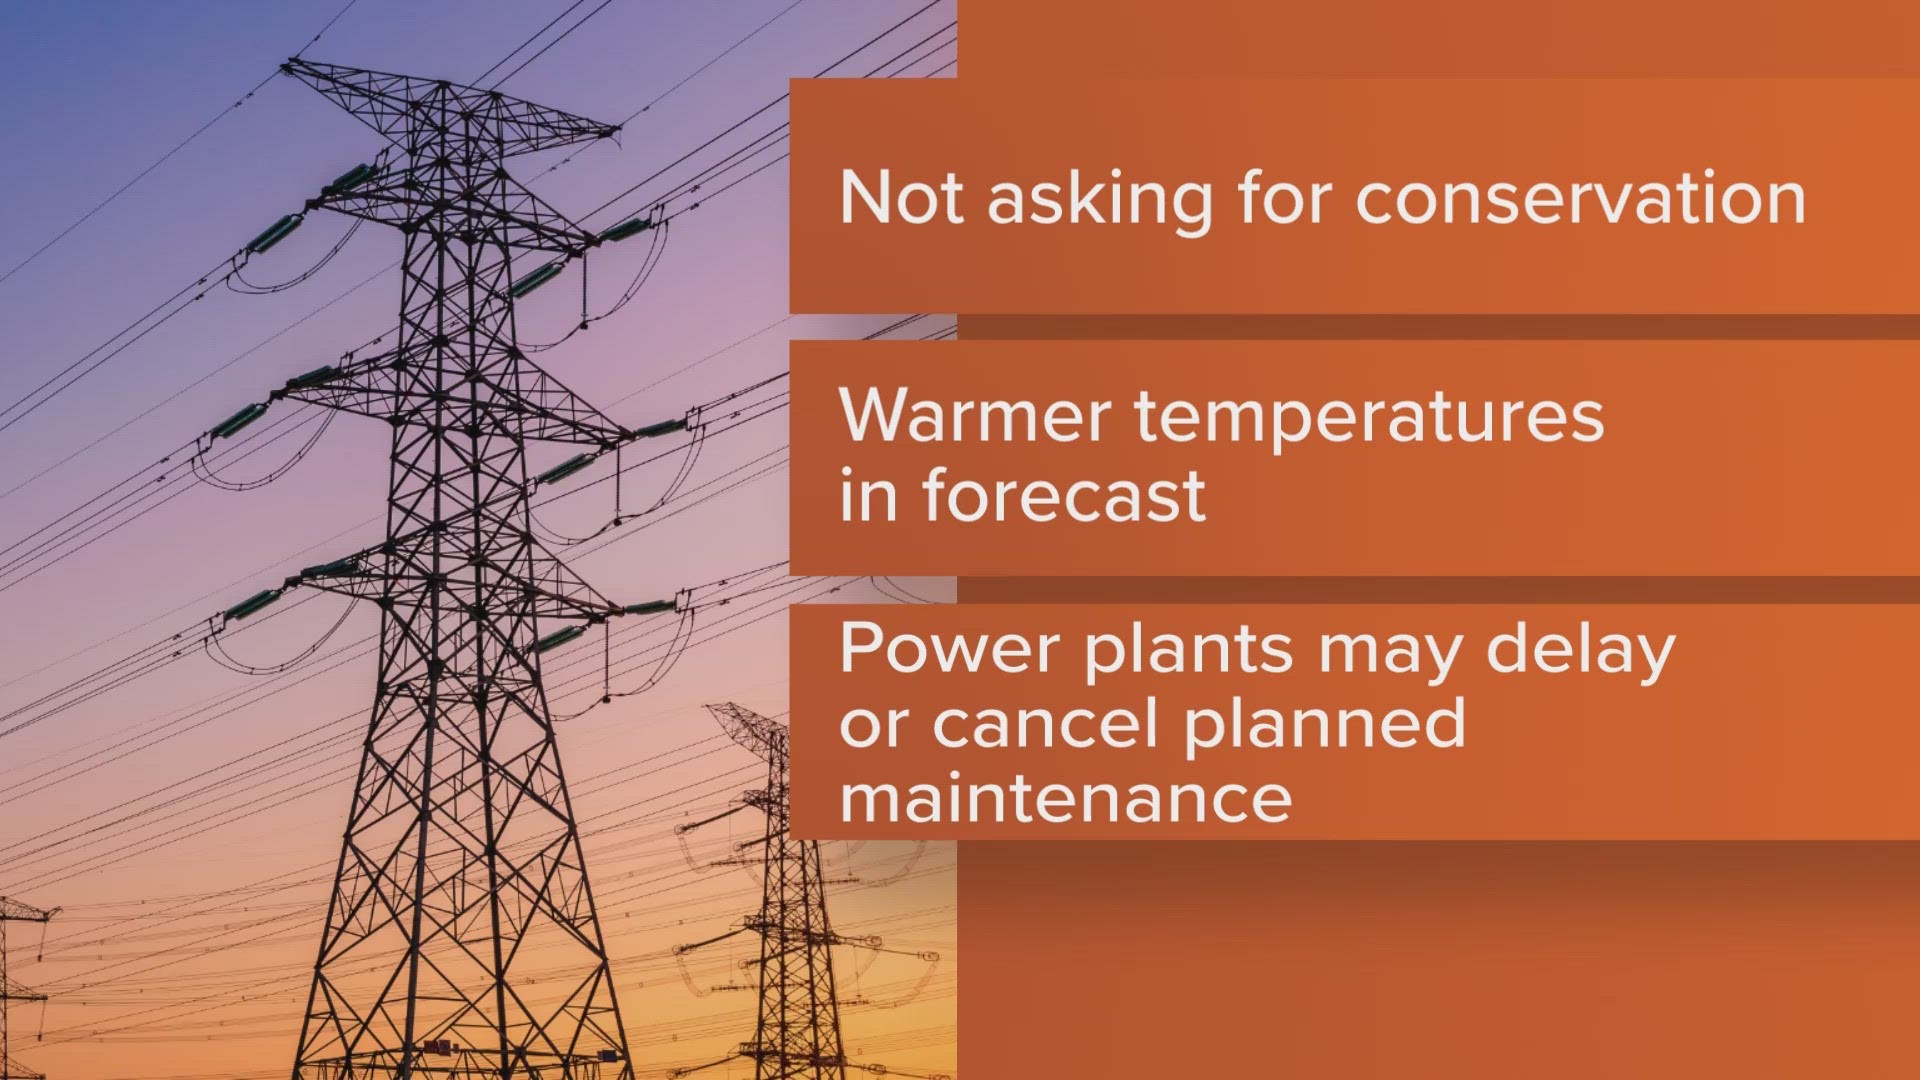 The utility company is not asking Texans to conserve energy, but power plant maintenance could be delayed or even cancelled as a result of warmer temperatures.